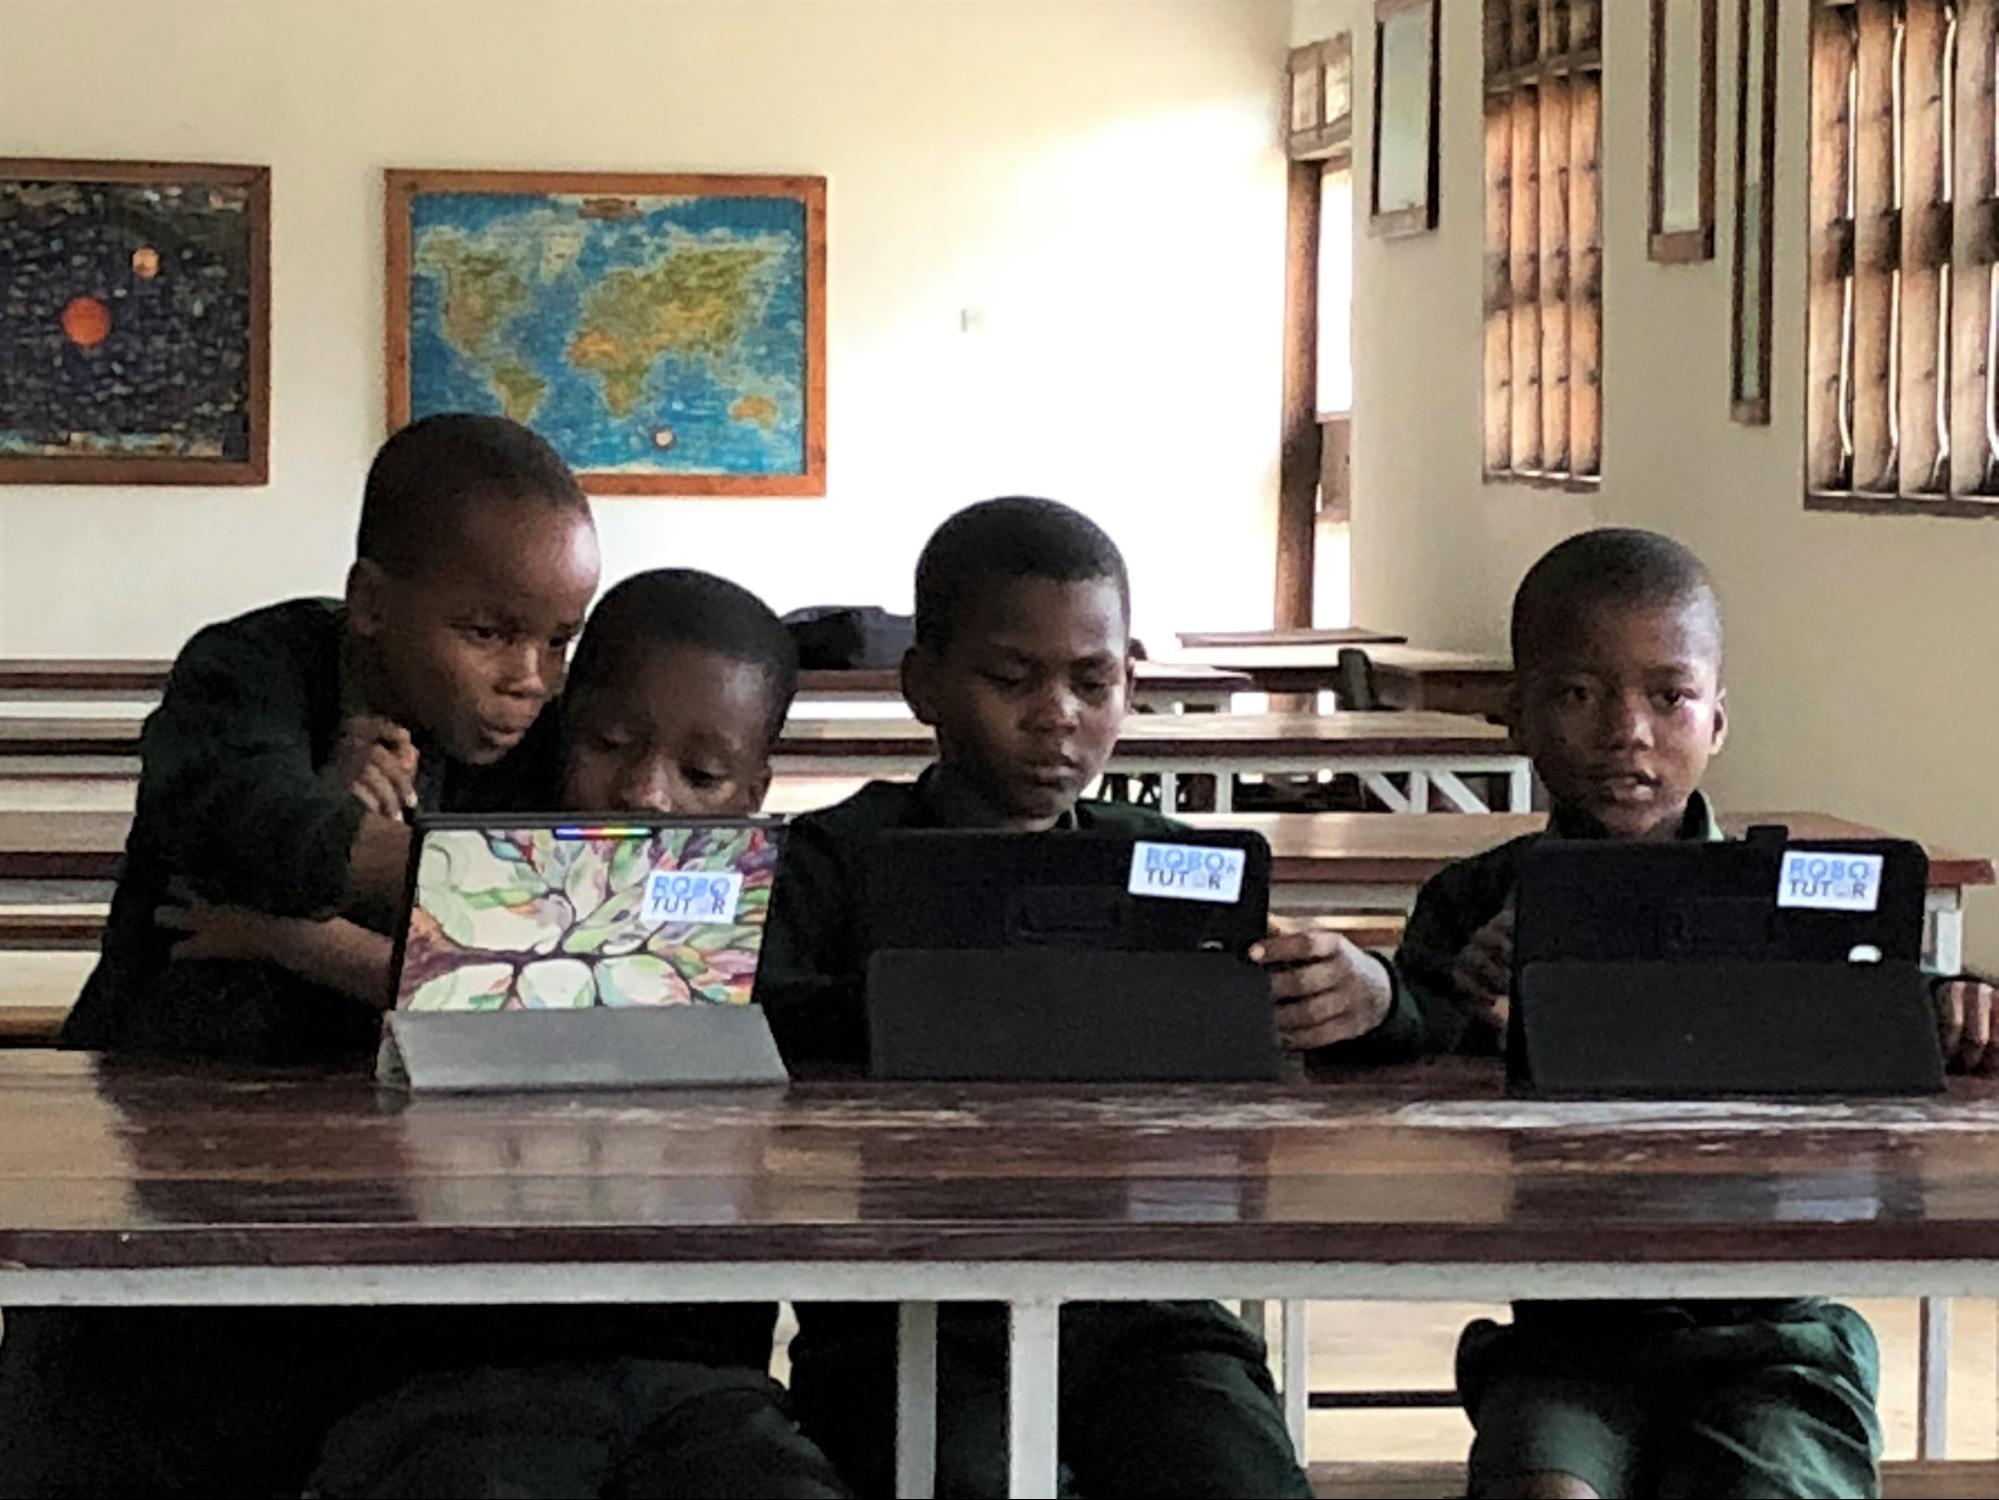 Image of several young children using the roboTutor application